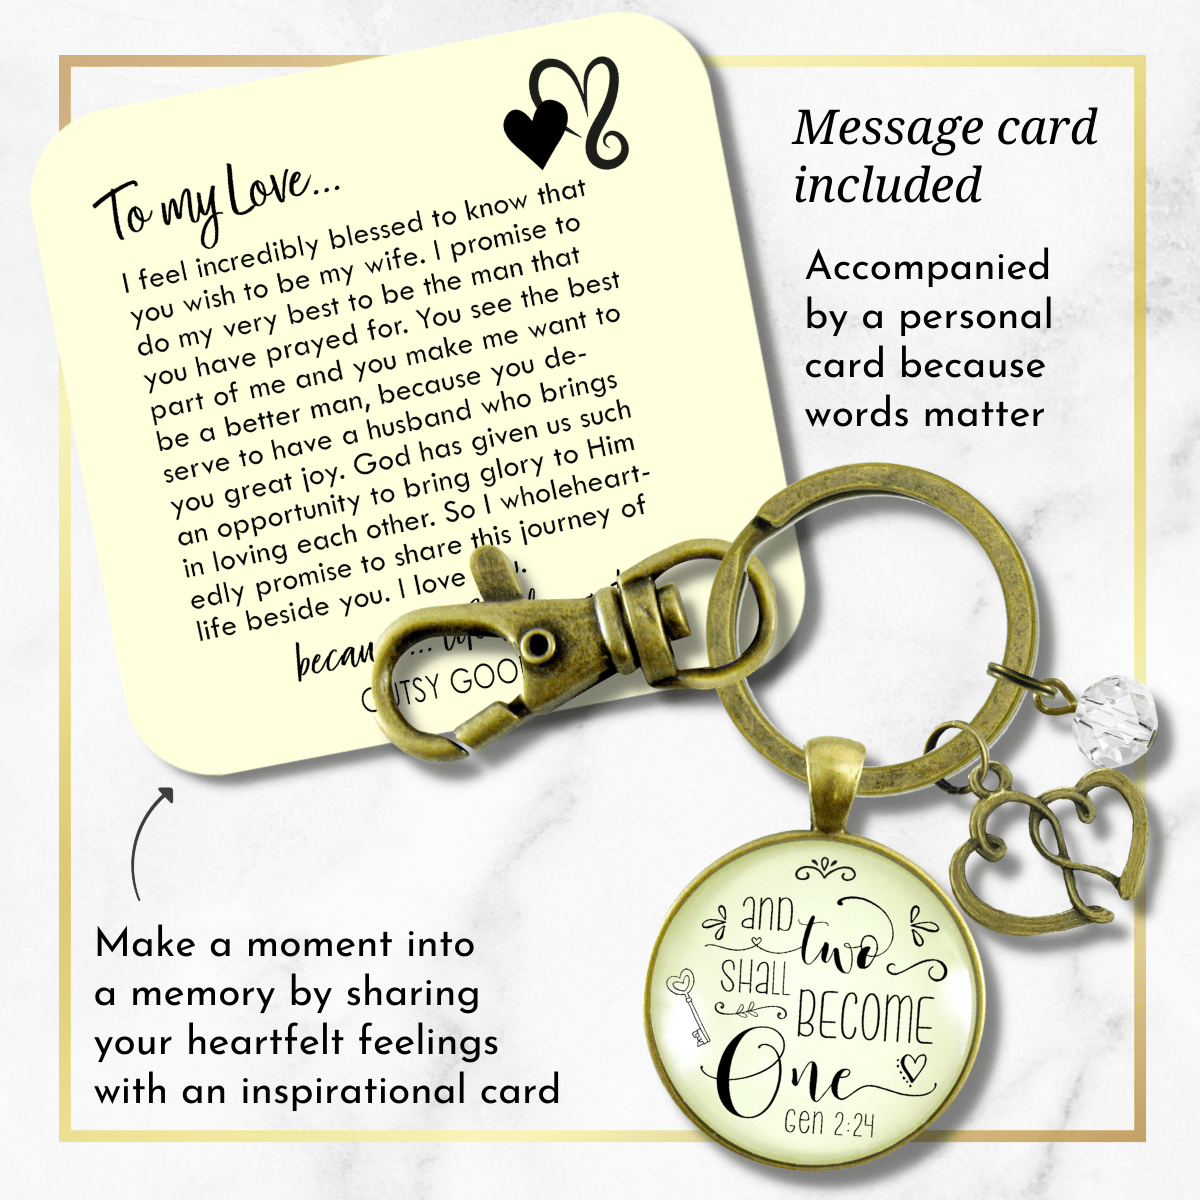 Christian Couples Jewelry Two Shall Become One Keychain Gift Romantic Charm - Gutsy Goodness Handmade Jewelry;Christian Couples Jewelry Two Shall Become One Keychain Gift Romantic Charm - Gutsy Goodness Handmade Jewelry Gifts